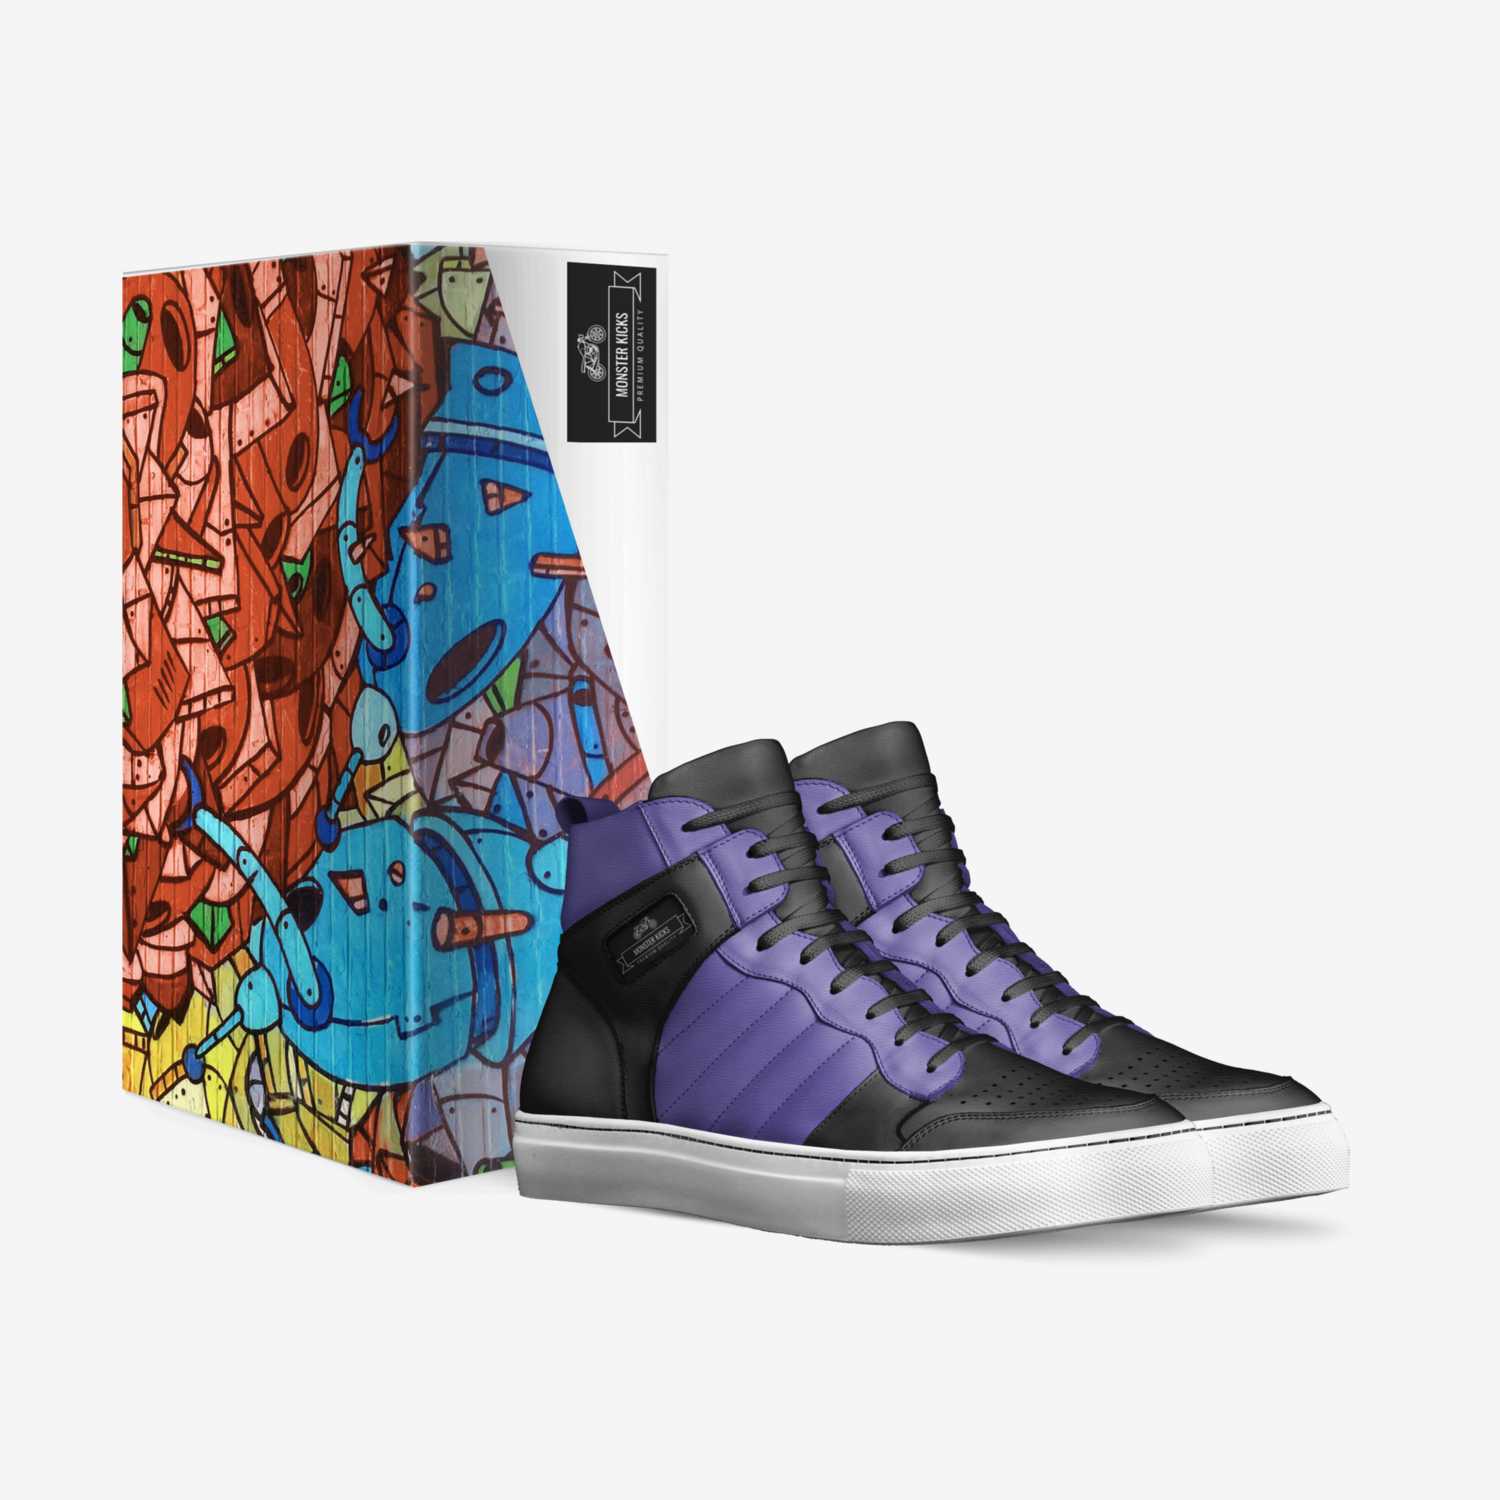 Monster kicks custom made in Italy shoes by Josias Sanche | Box view